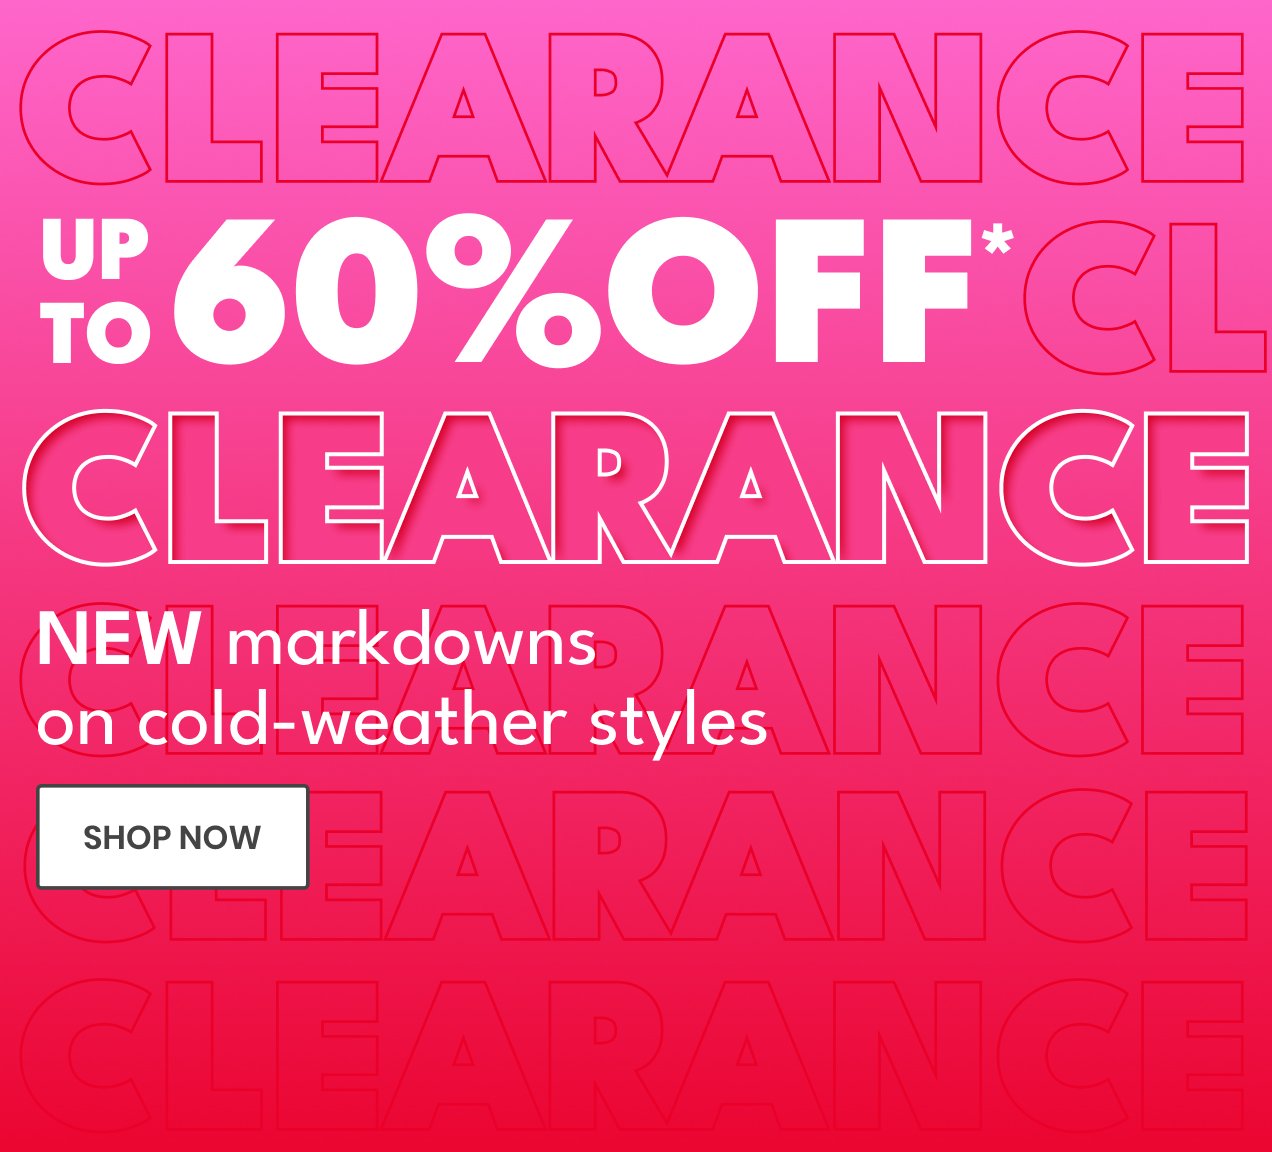 UP TO 60% OFF* CLEARANCE | NEW markdowns on cold-weather styles | SHOP NOW